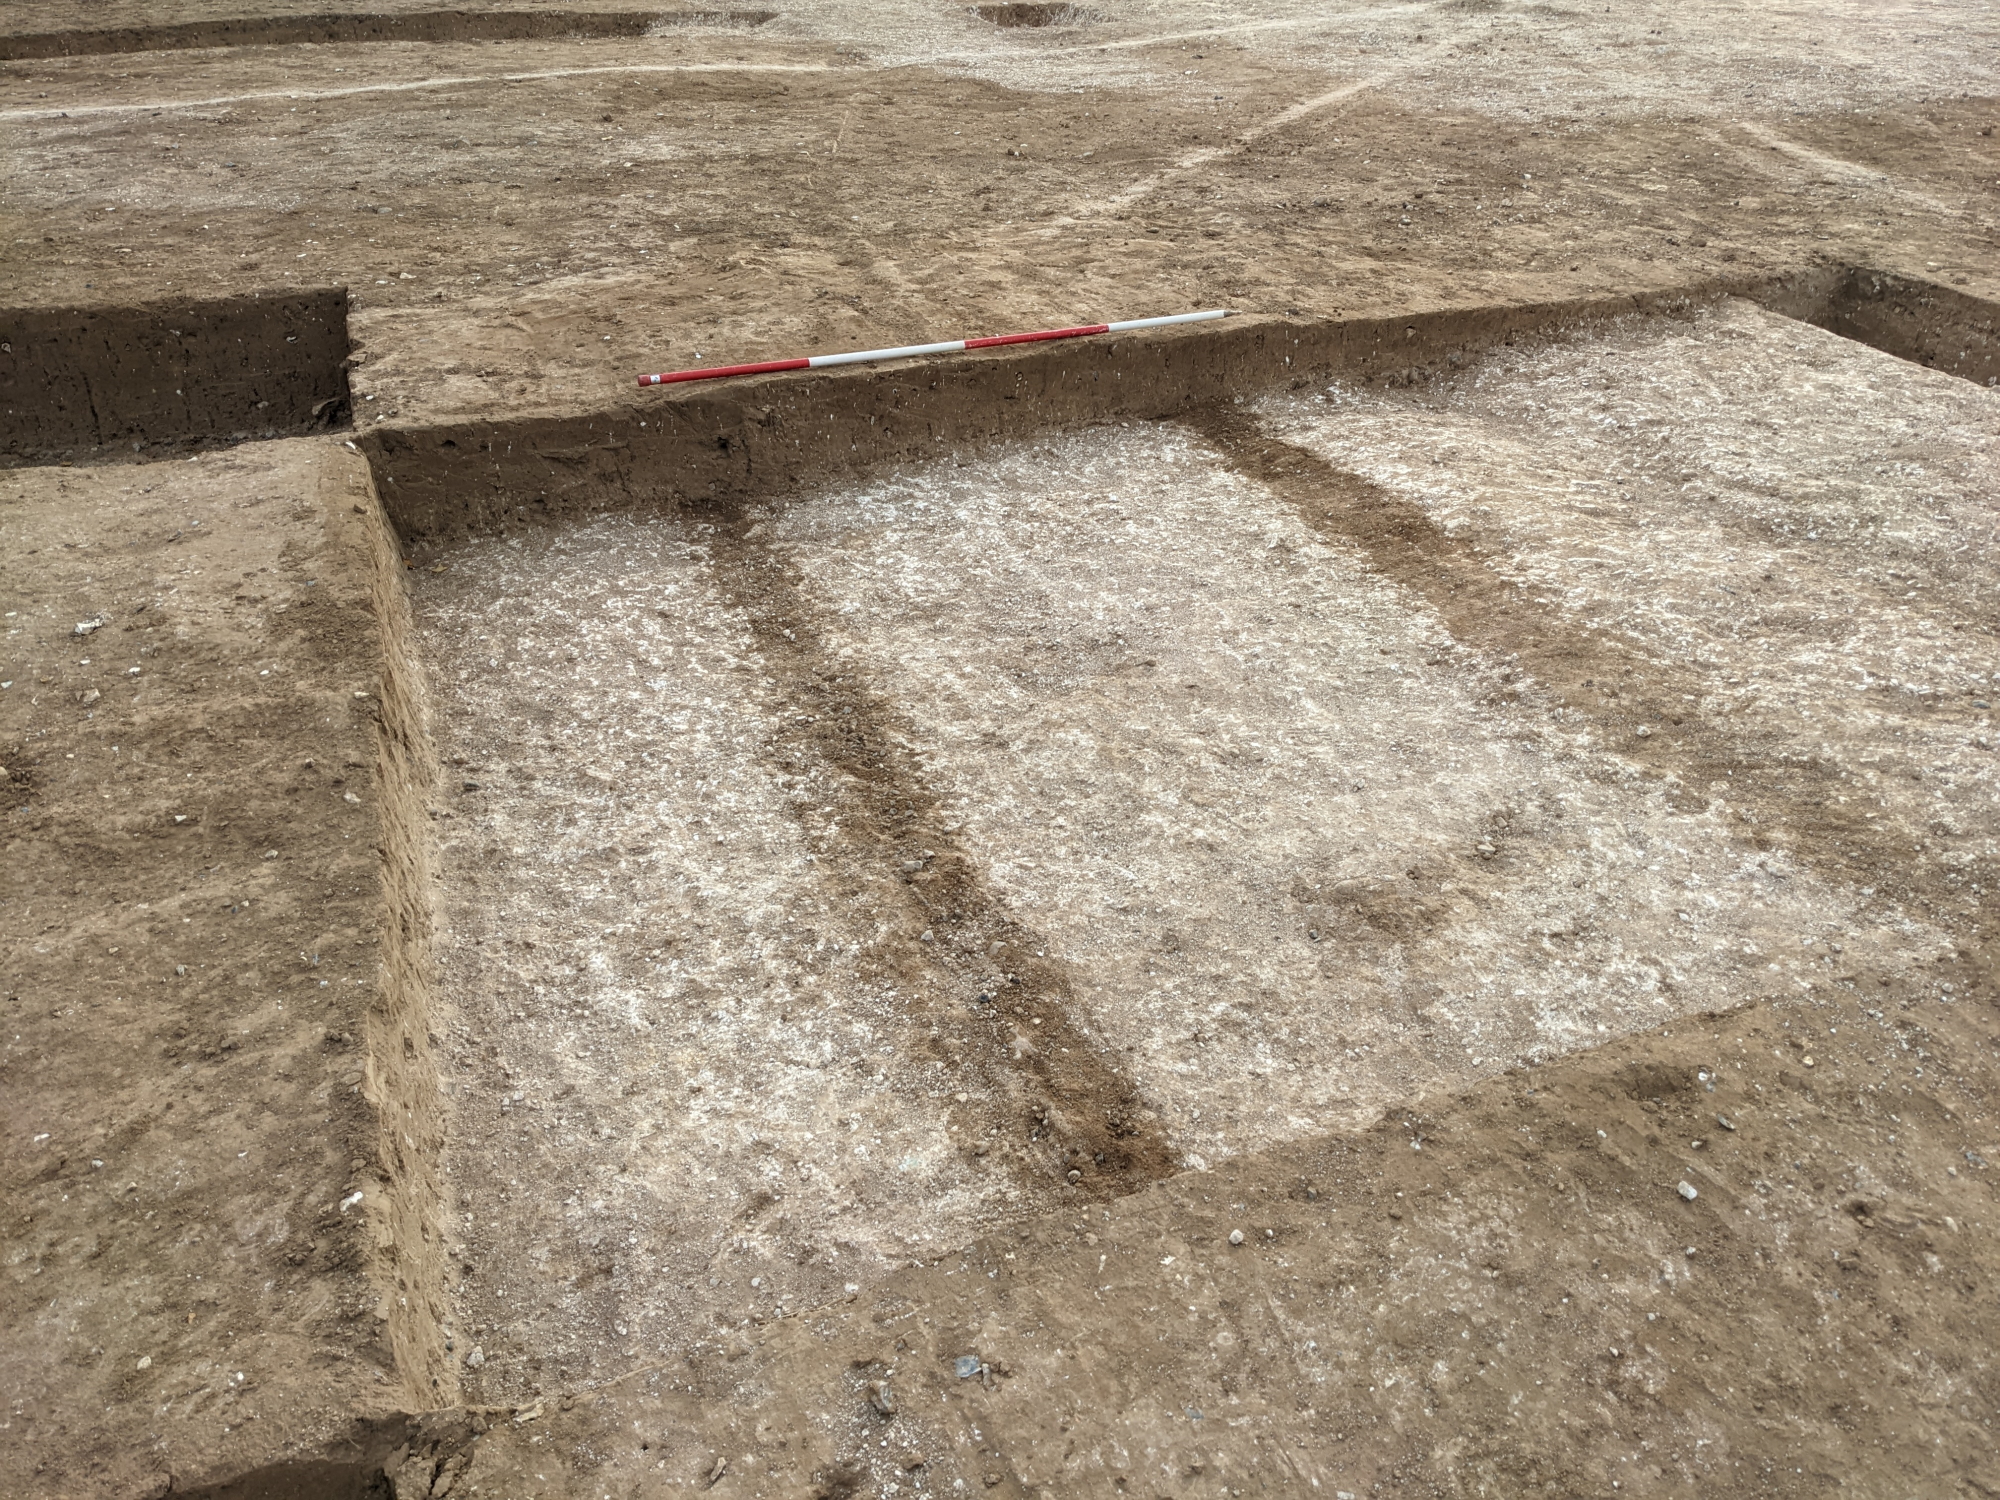 An archaeological trench showing parallel darker lines about 2m apart against the lighter chalk.